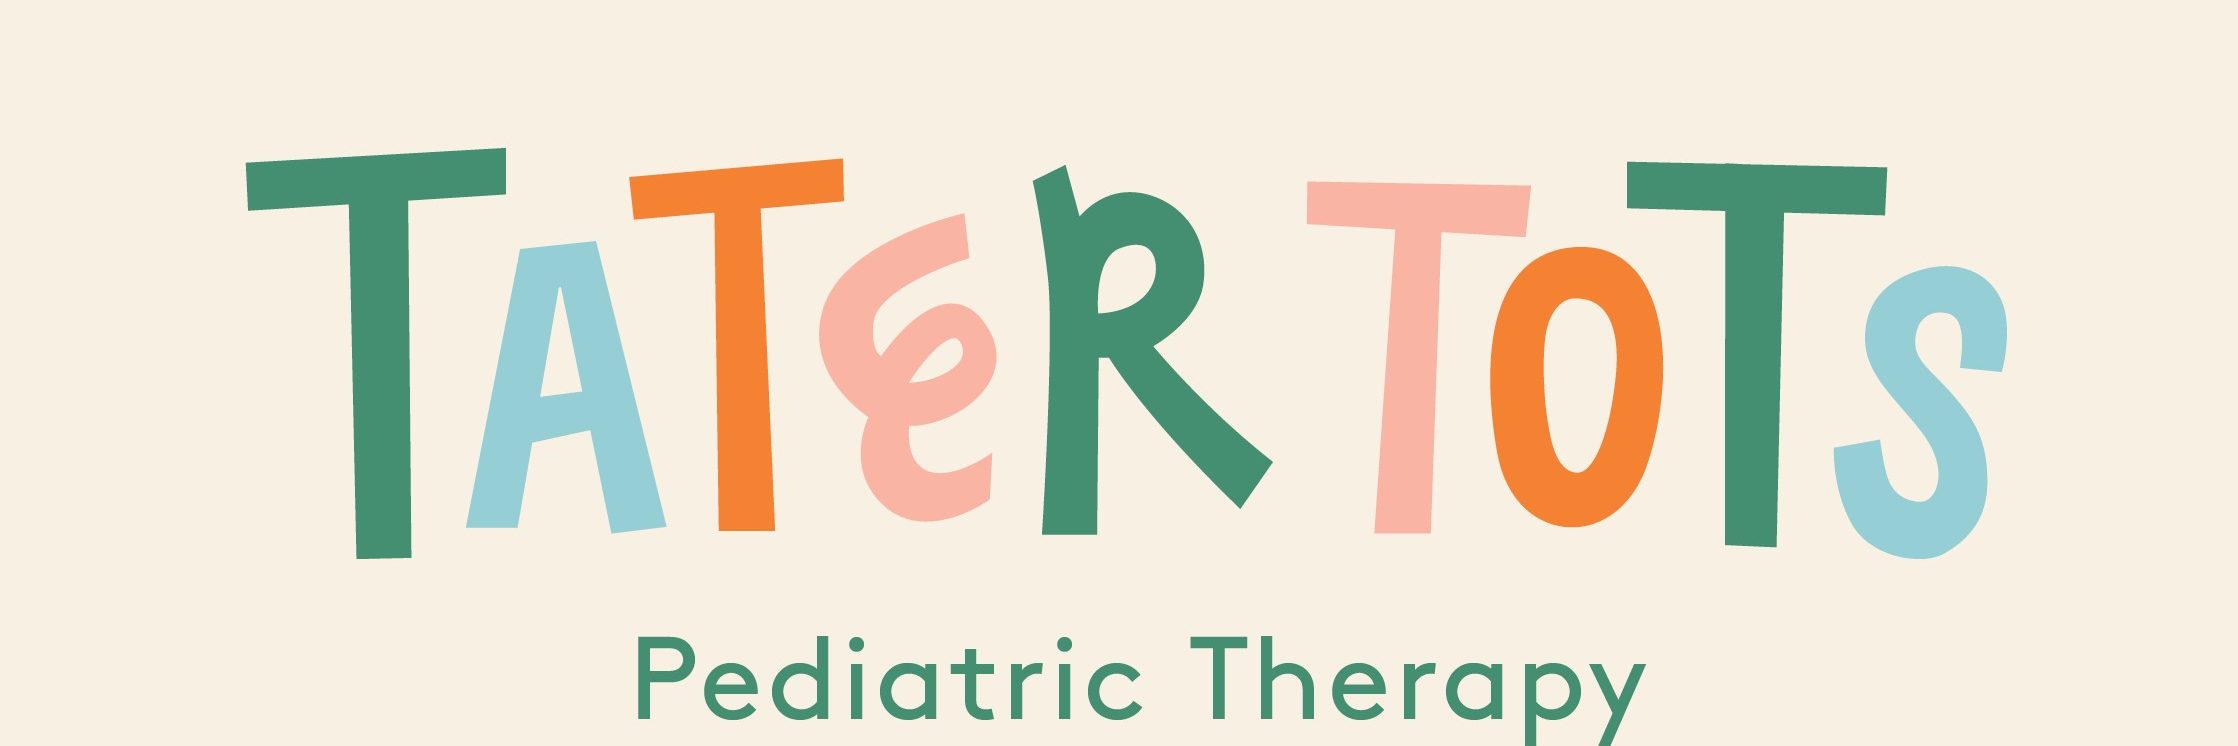 Tater Tots Pediatric Therapy